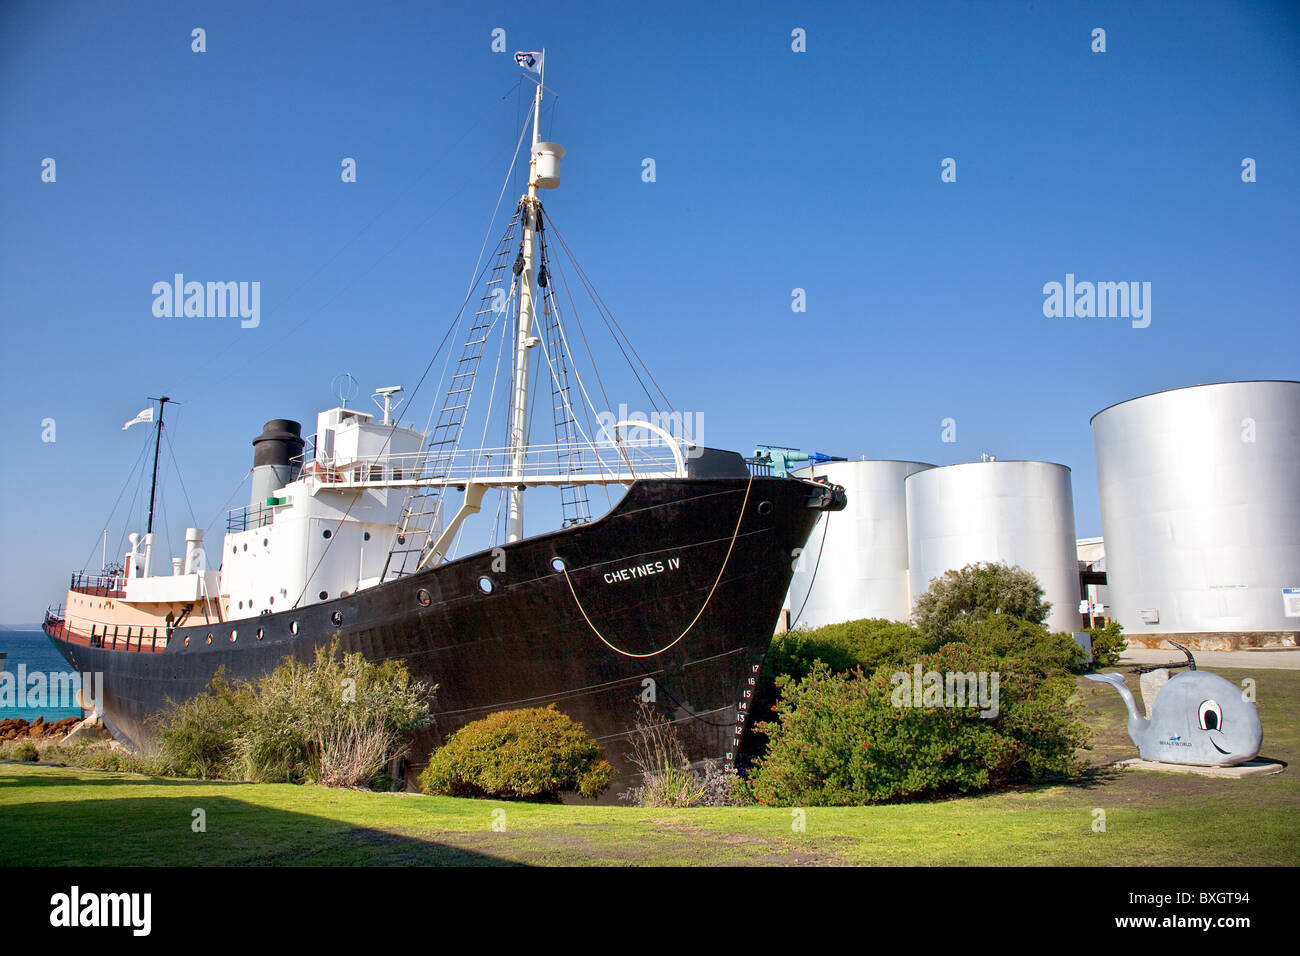 The whaler Cheynes IV now a museum ship at Whale world near Albany Western Australia with storage tanks and Willy Whale Stock Photo